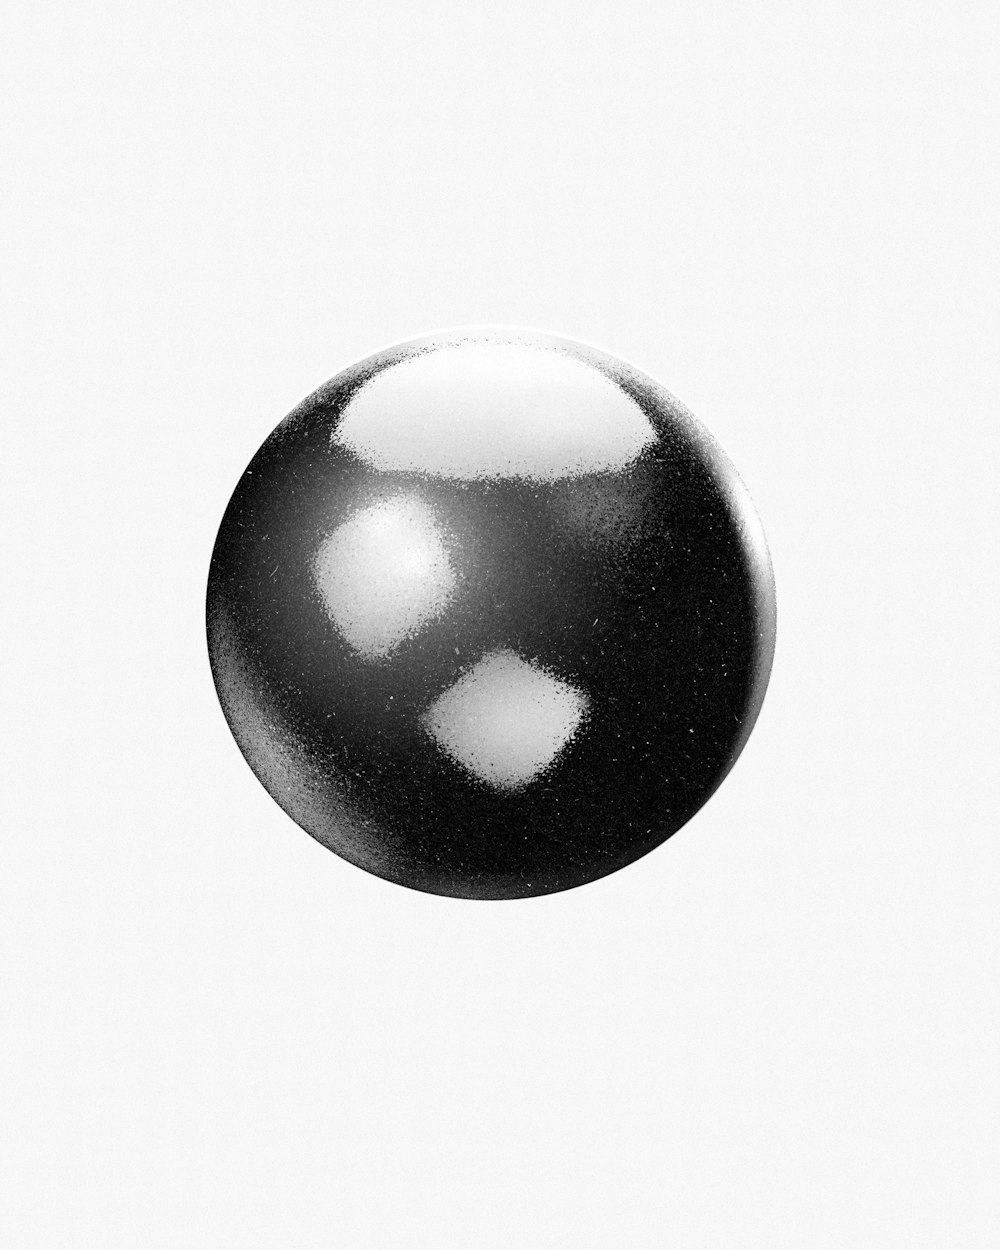 a black and white image of a planet